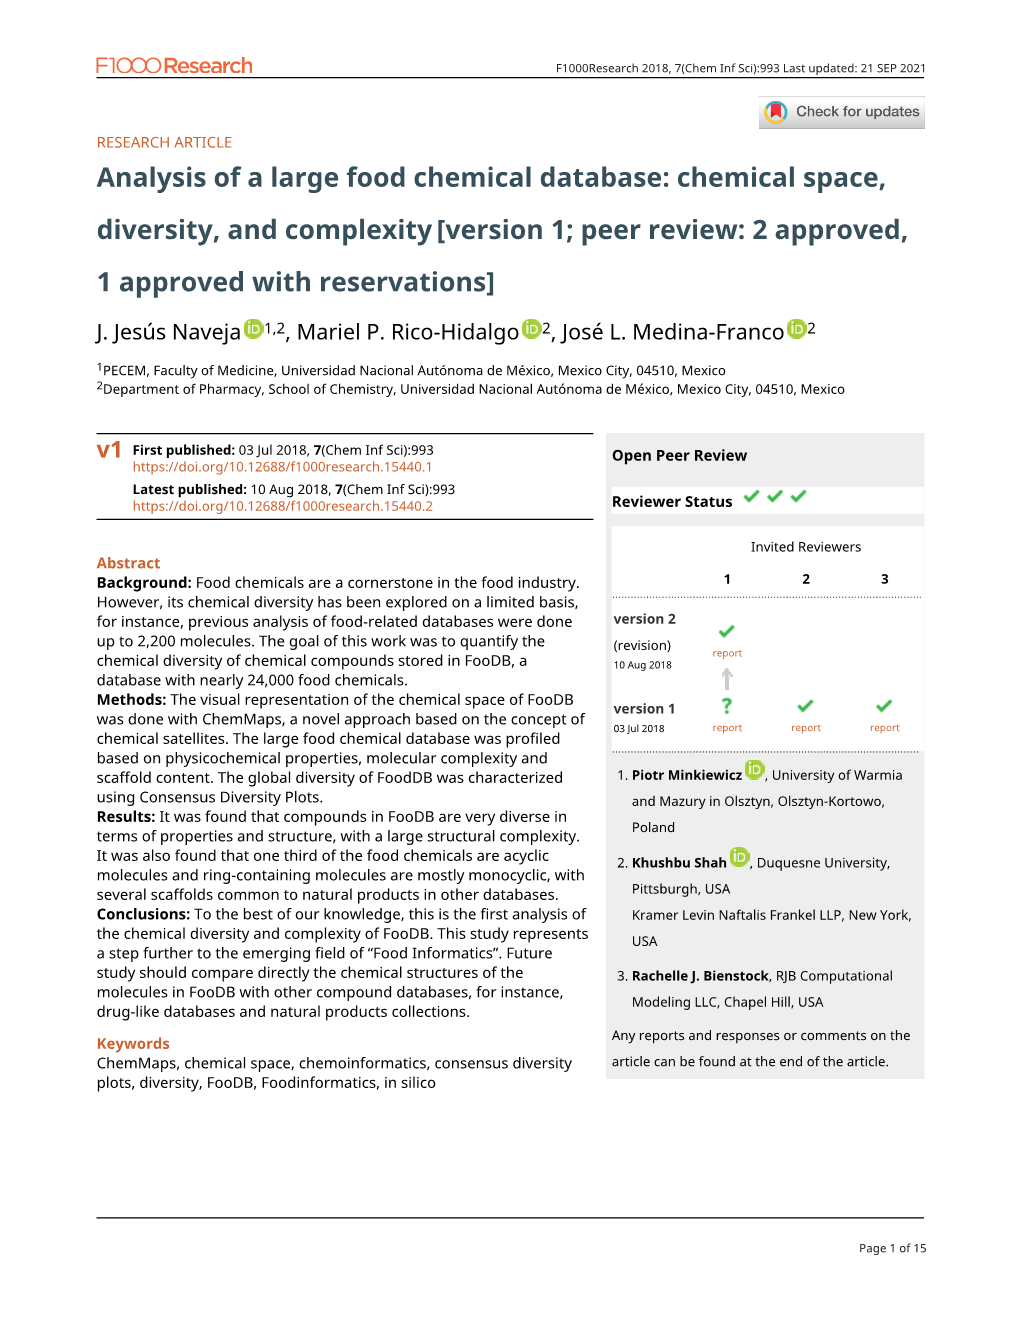 Chemical Space, Diversity, and Complexity[Version 1; Peer Review: 2